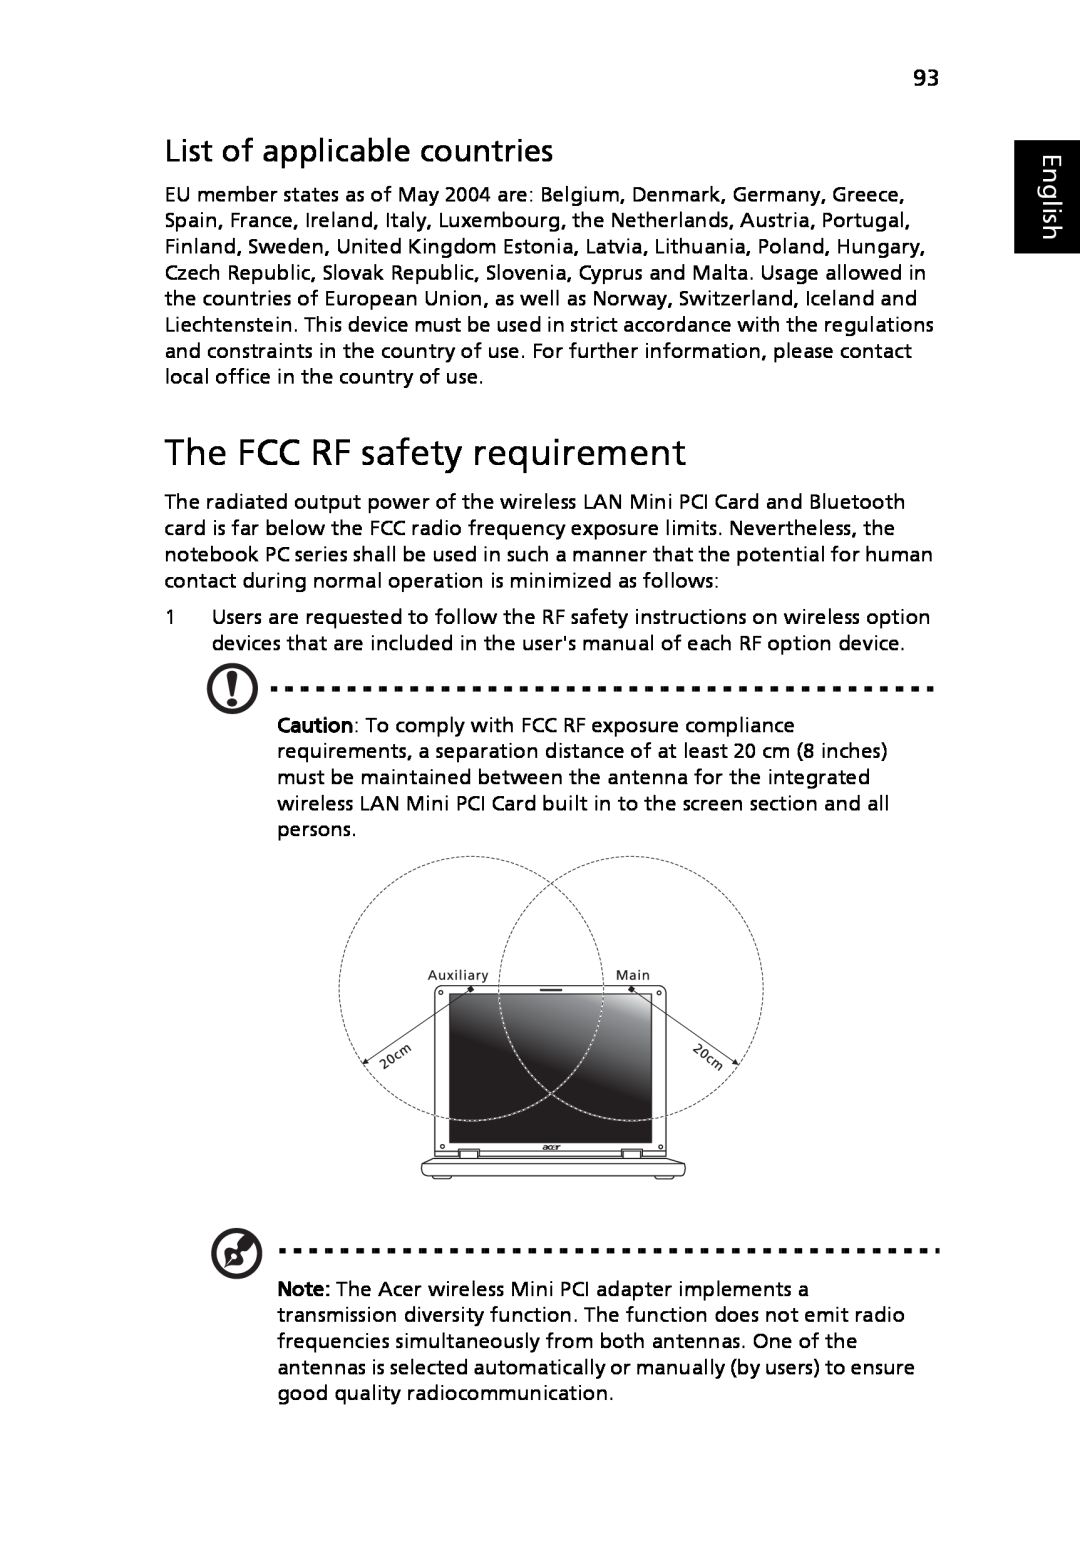 Acer 5520G, 5220 manual The FCC RF safety requirement, List of applicable countries, English 